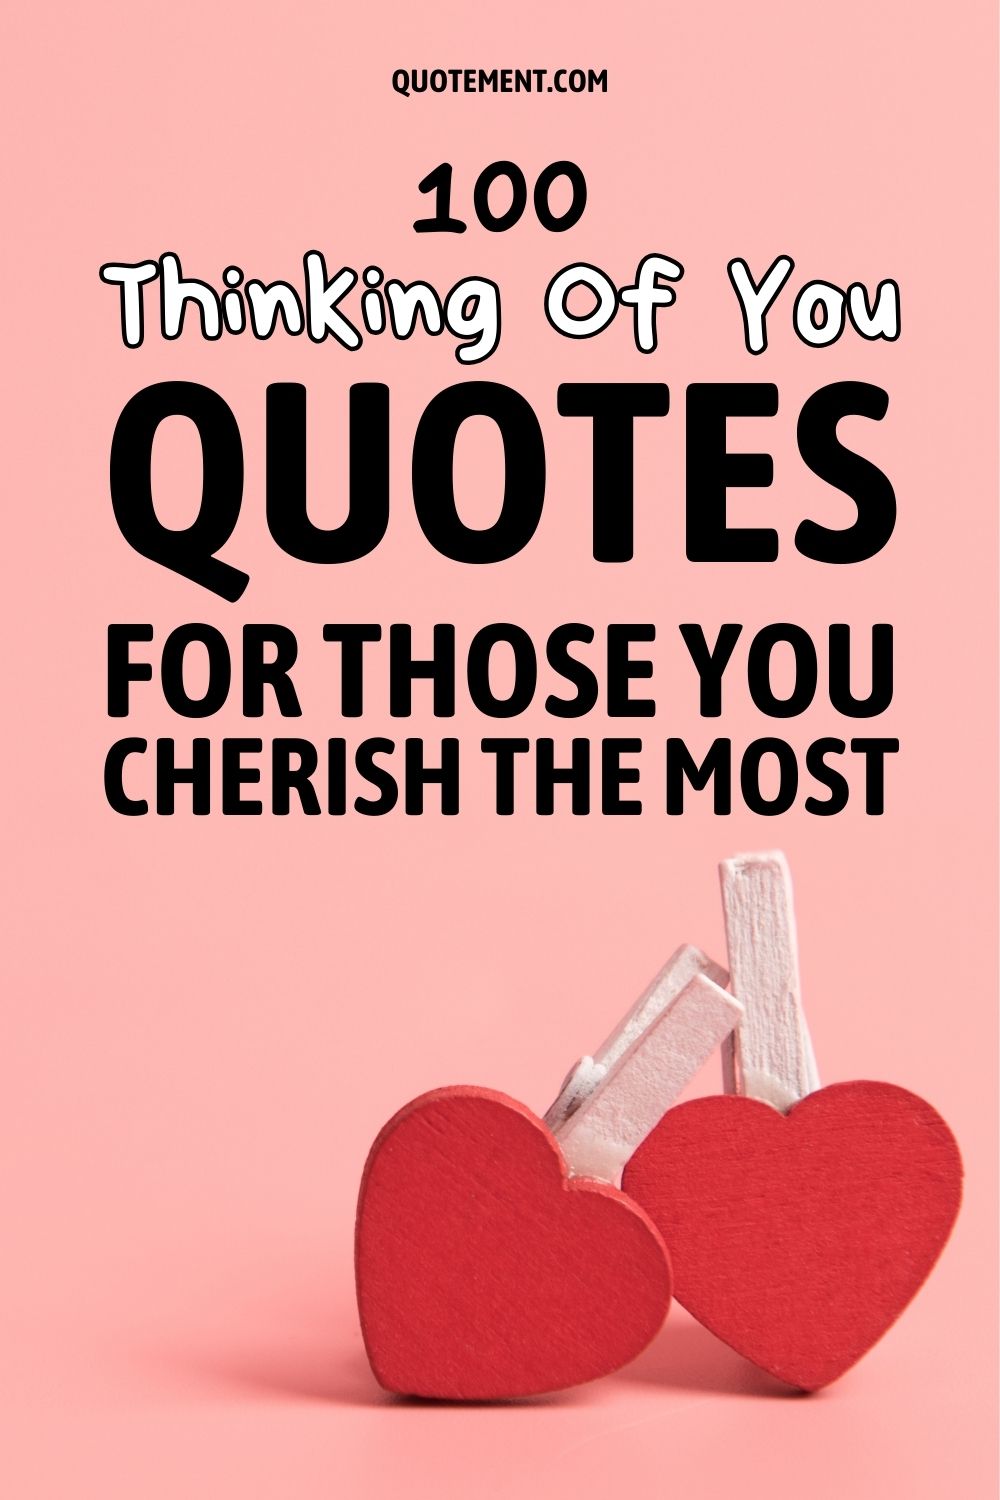 100 Thinking Of You Quotes For Those You Cherish The Most
